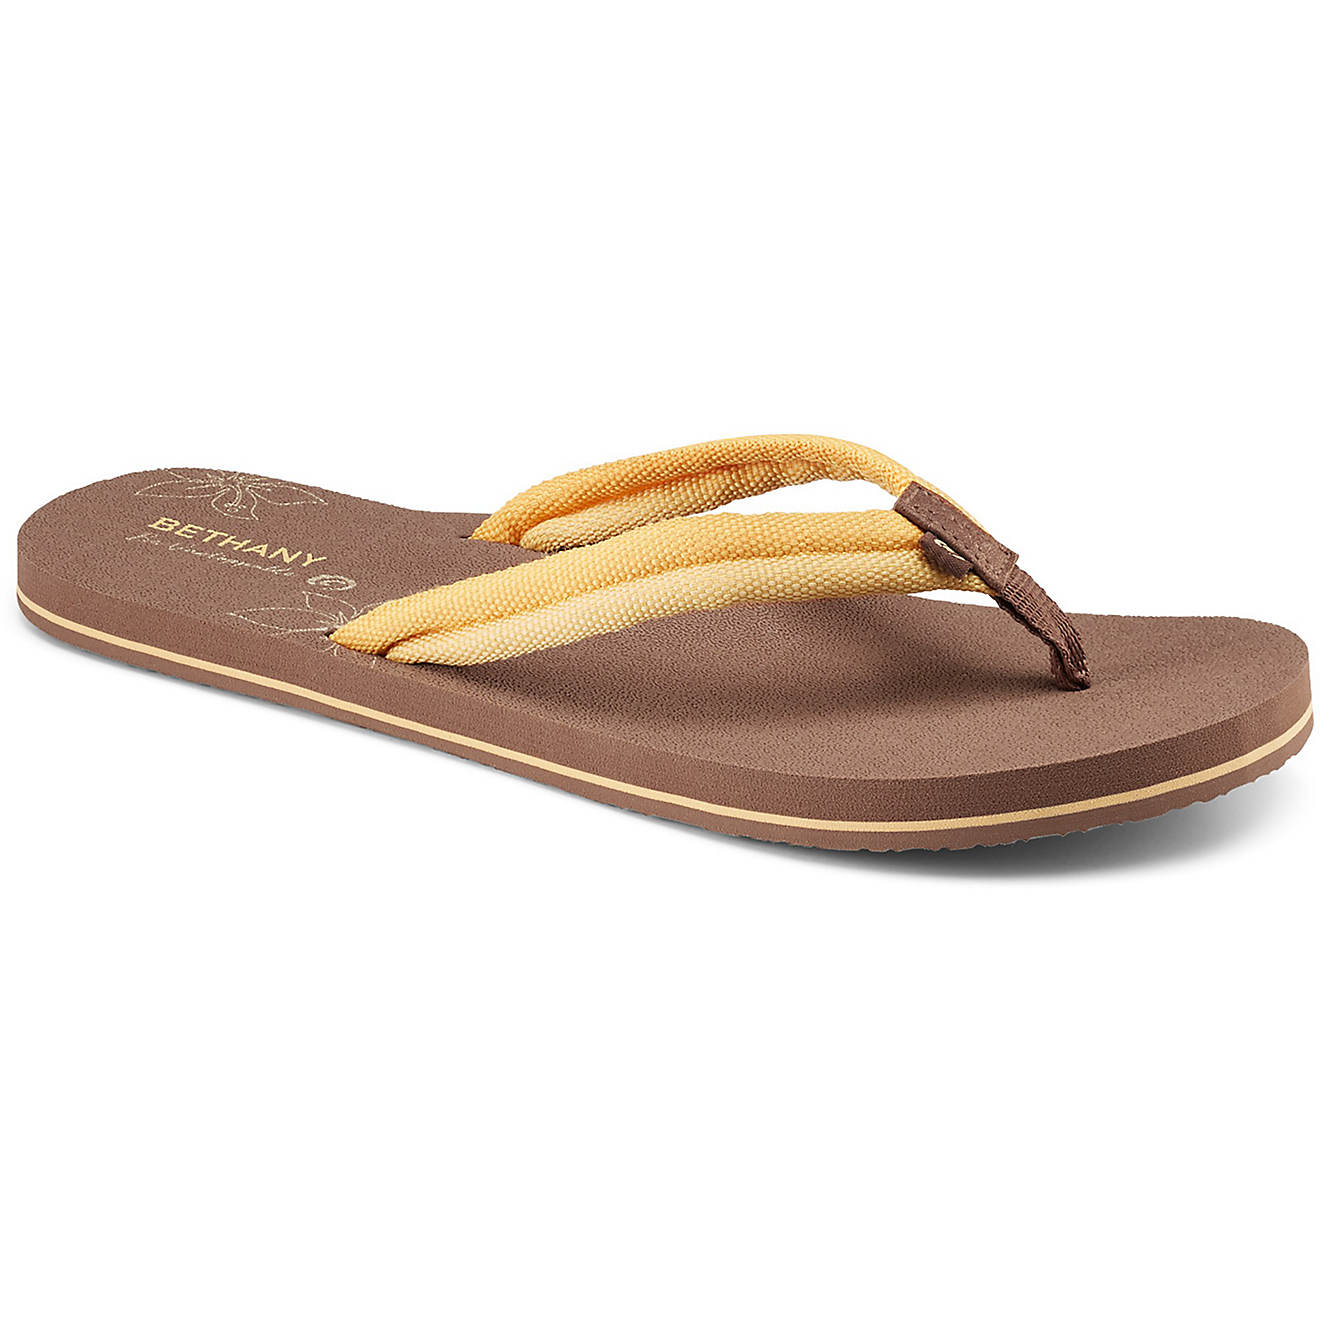 Cobian Women's Bethany Honua Flip Flop Sandals                                                                                   - view number 1